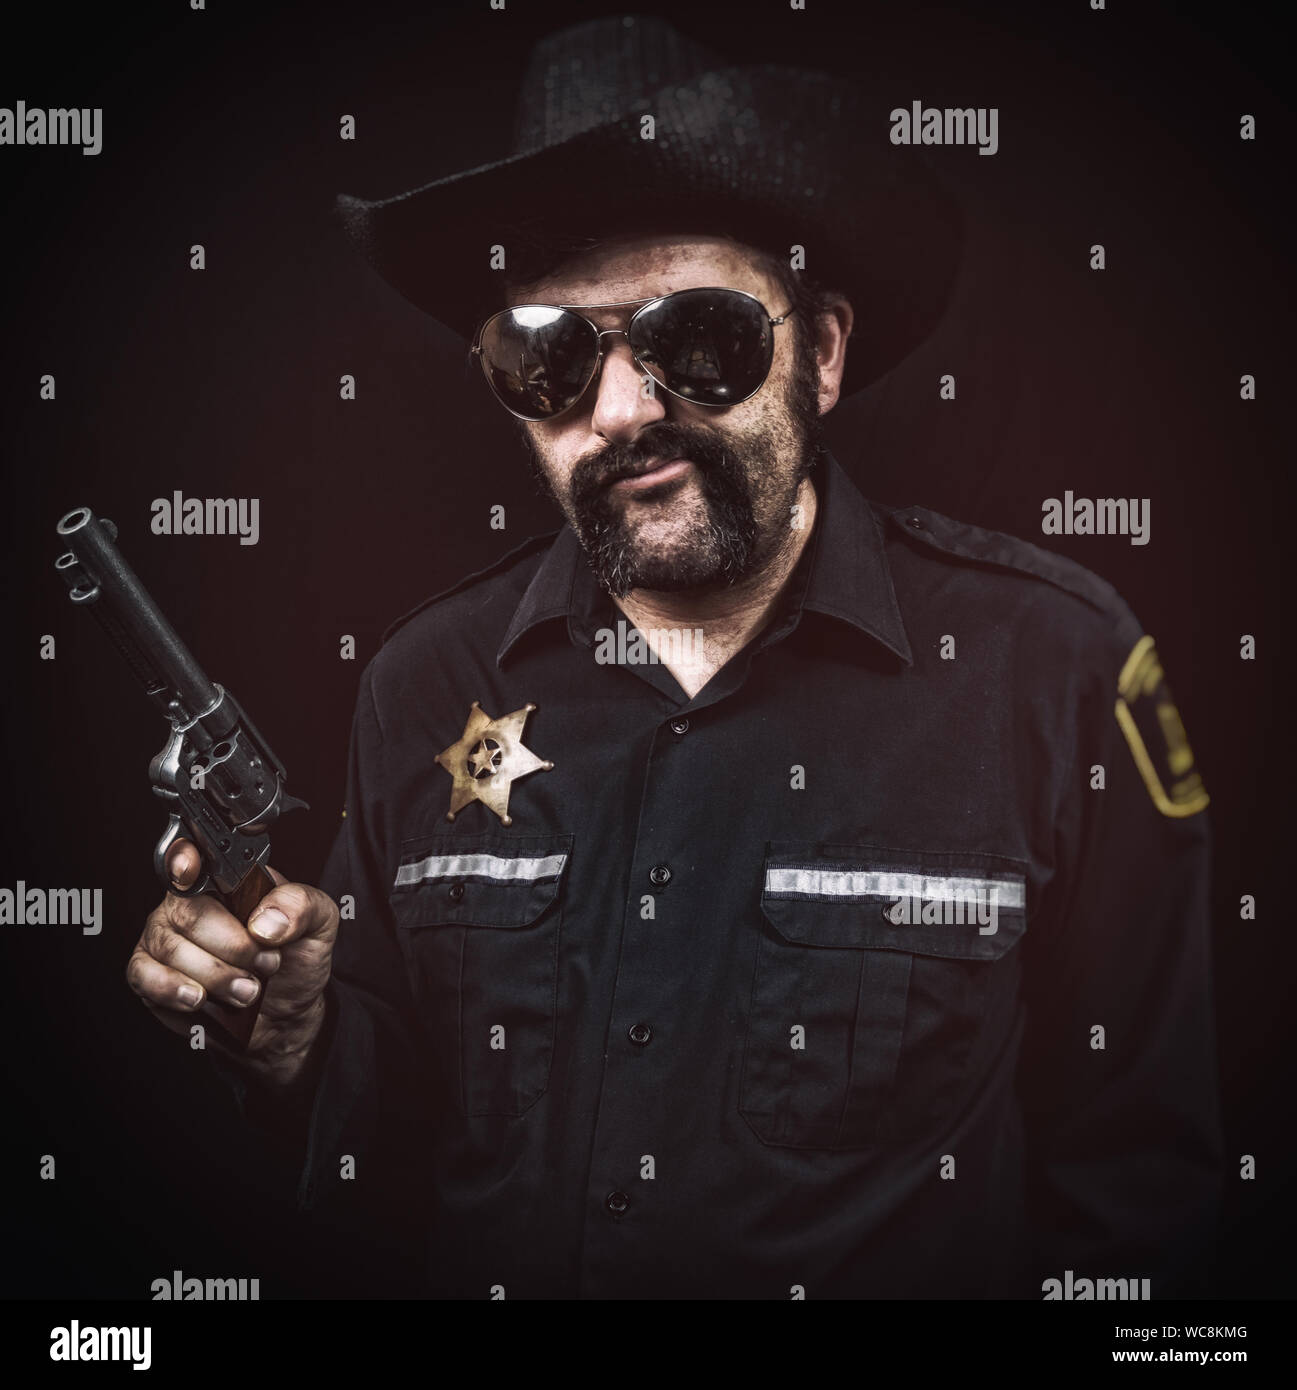 Sleazy southern style sheriff cop smirking or chewing tobacco with a greasy mustache, cowboy hat, and pistol. Stock Photo